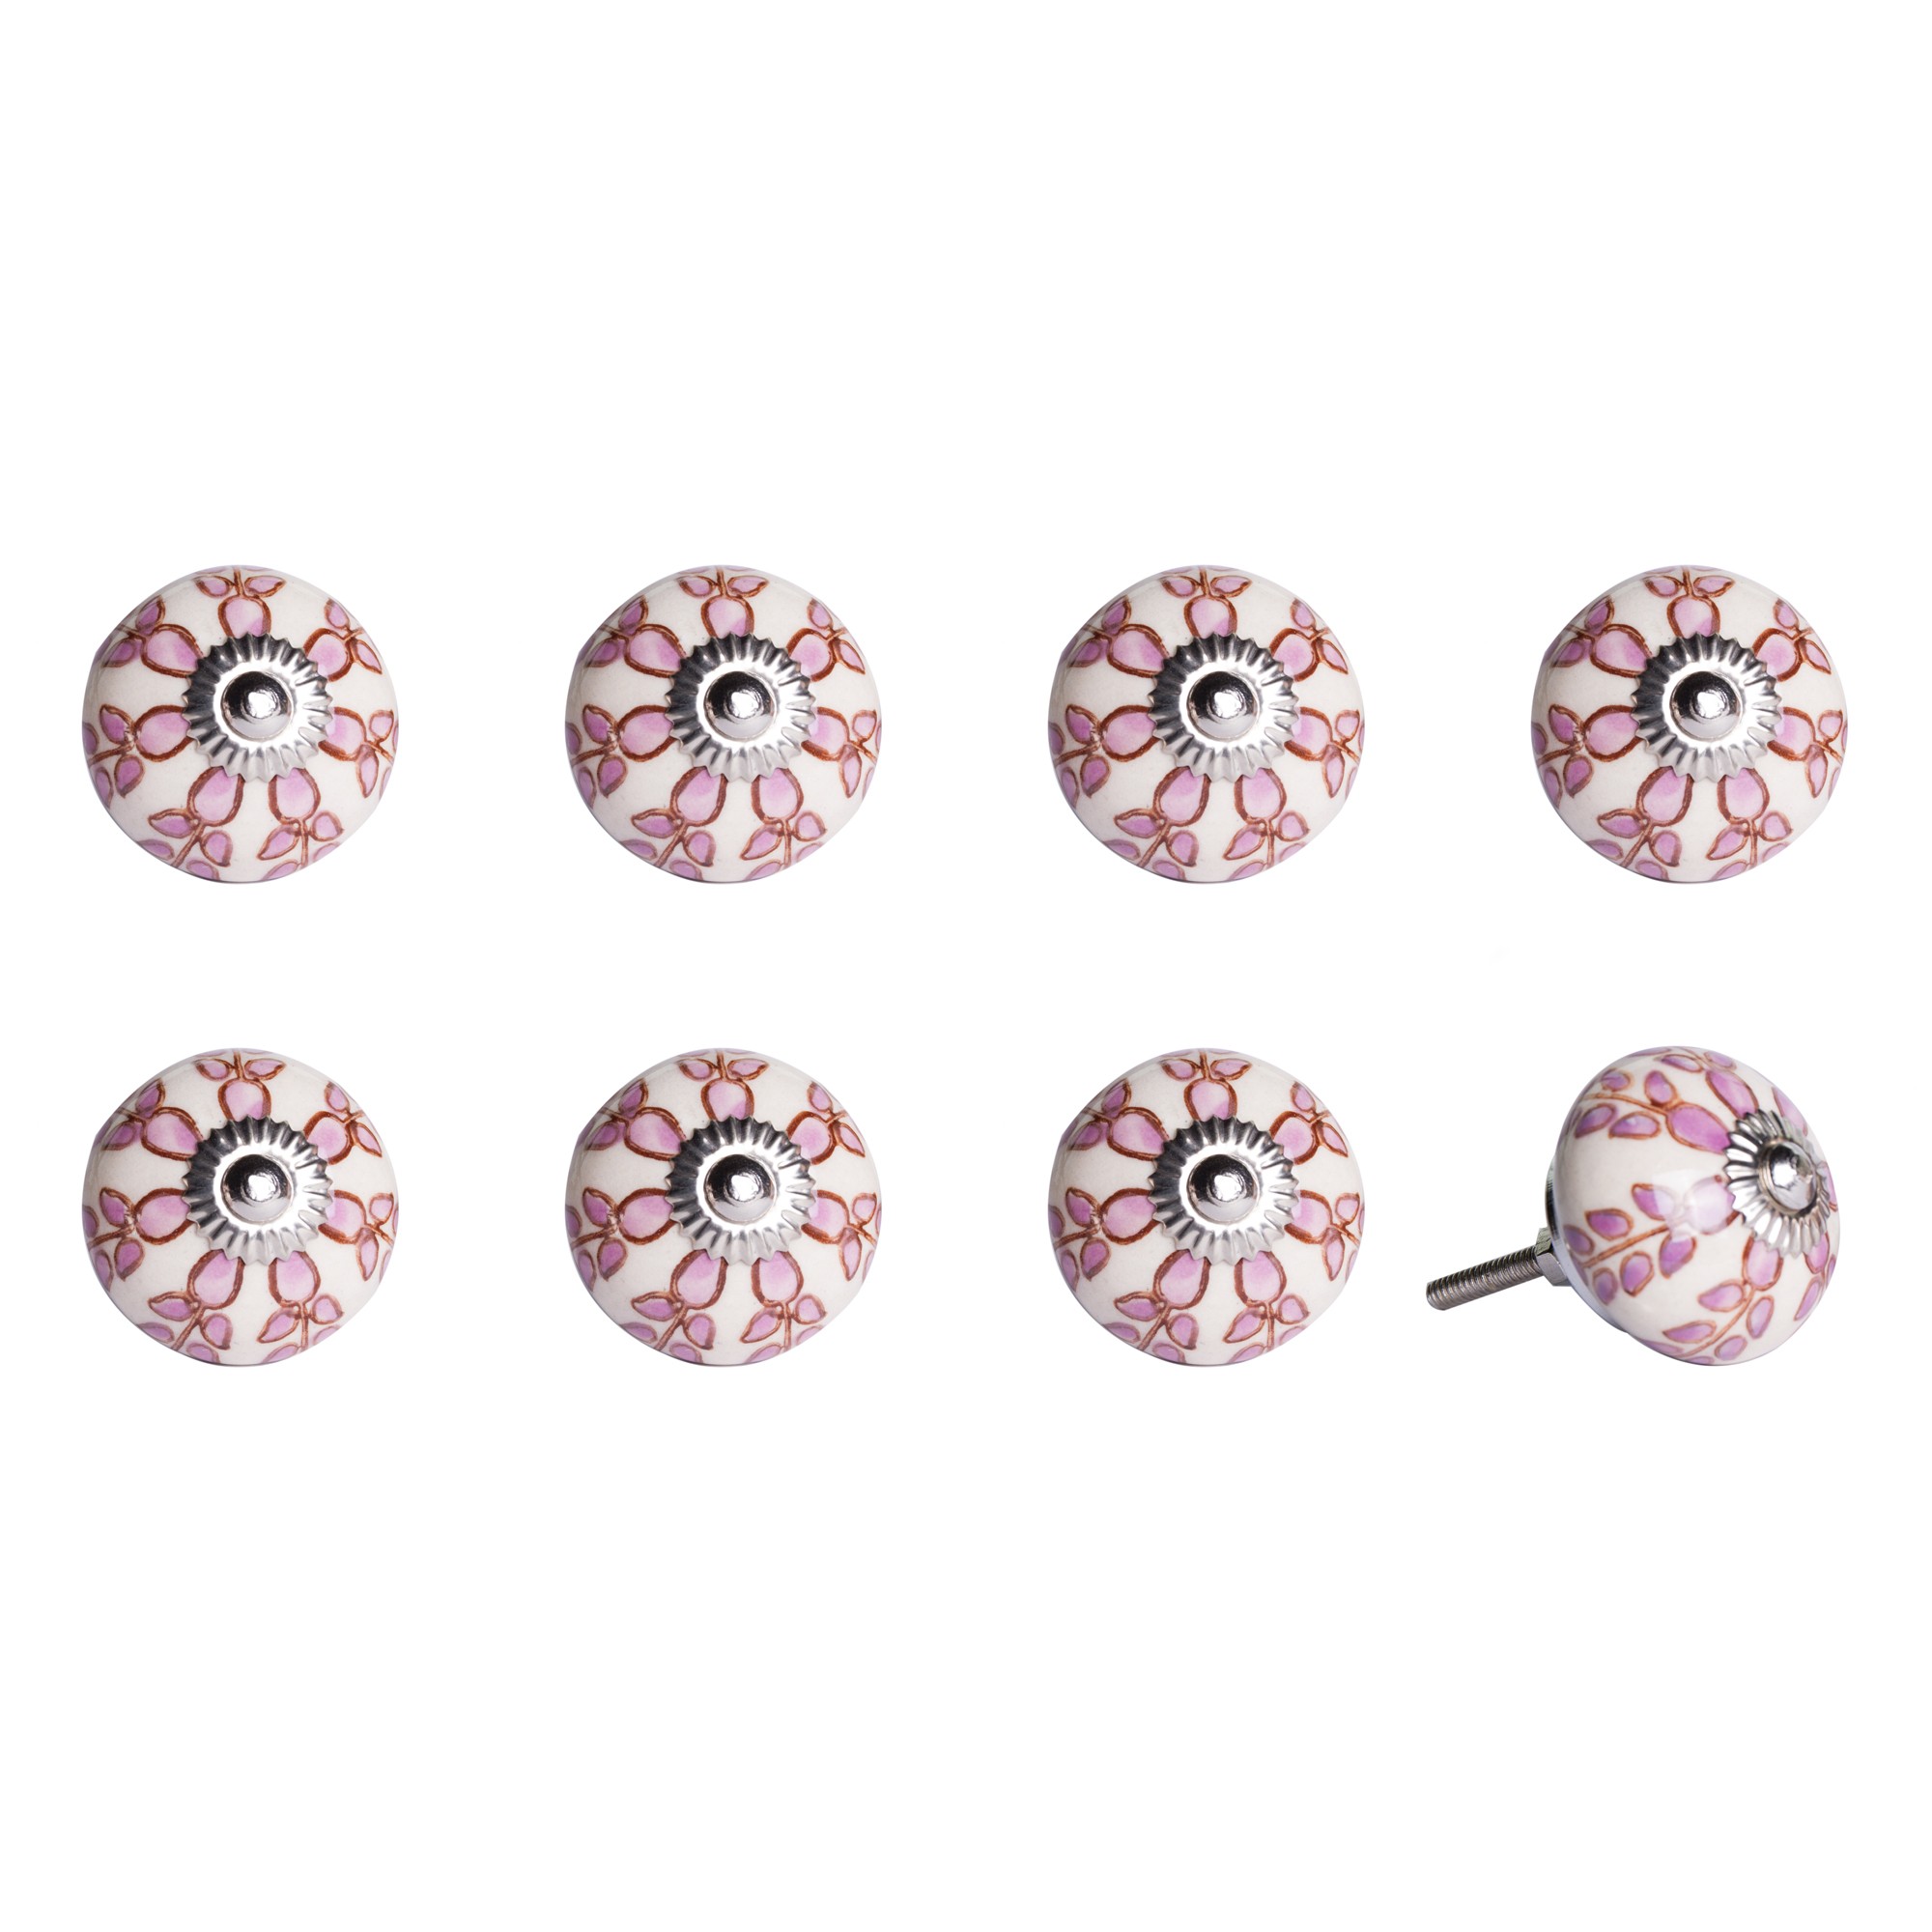 1.5" x 1.5" x 1.5" Hues Of White, Pink And Burgundy - Knobs 8-Pack